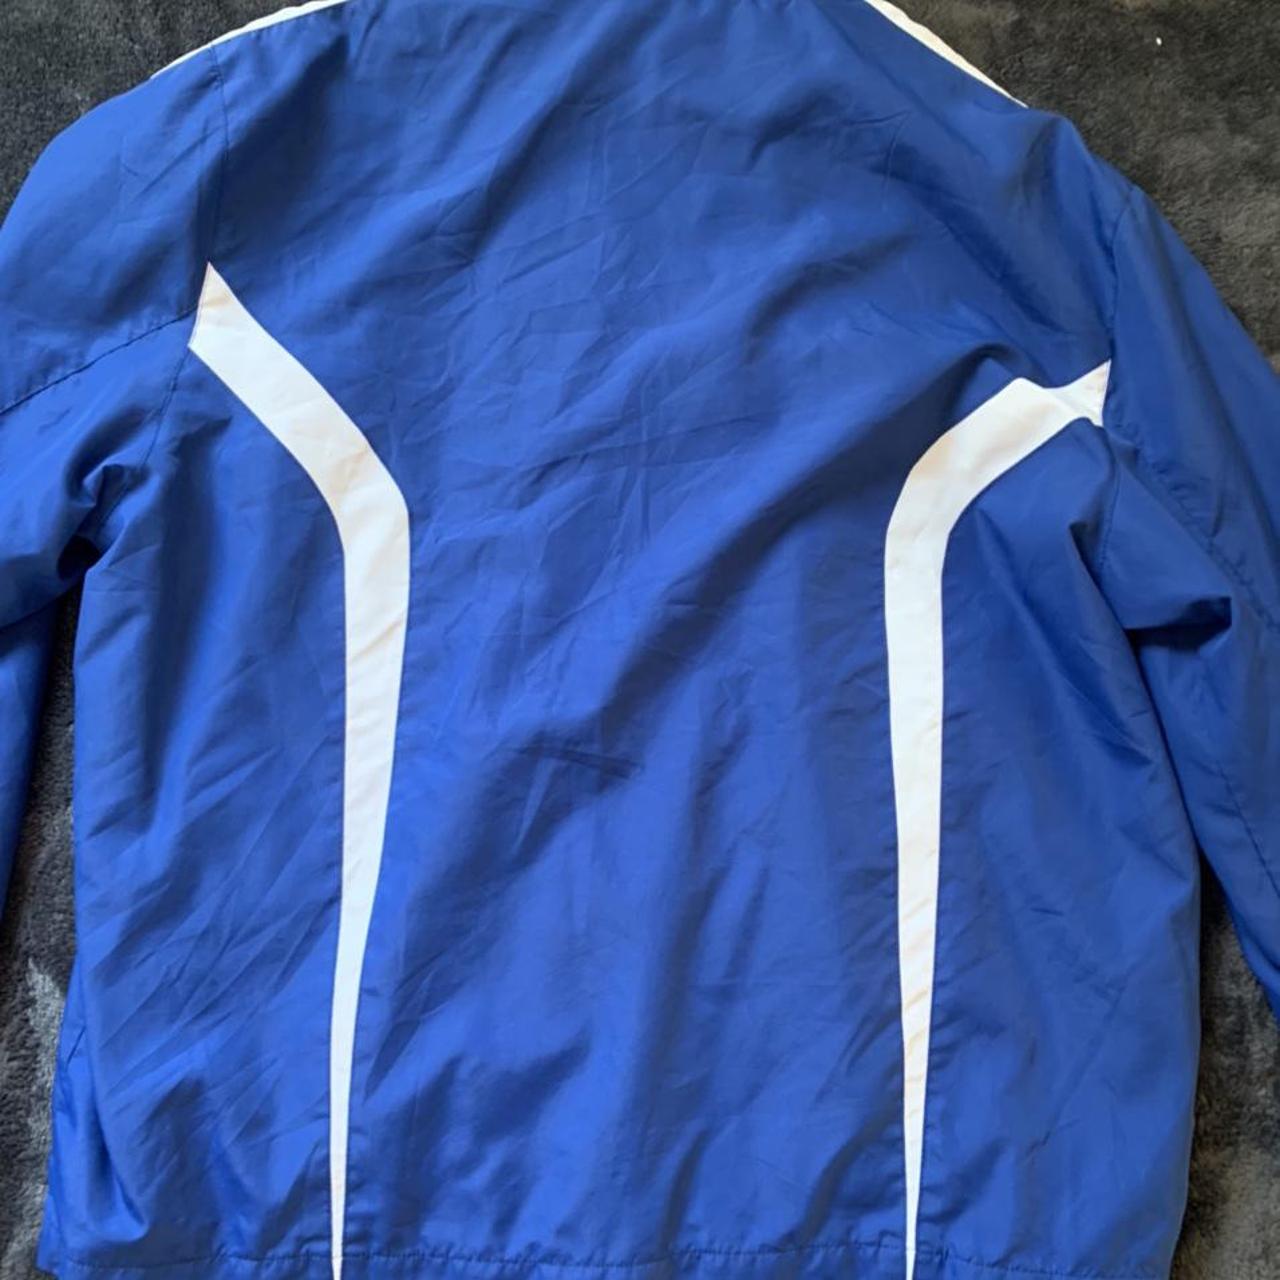 Men's Blue and White Jacket (2)